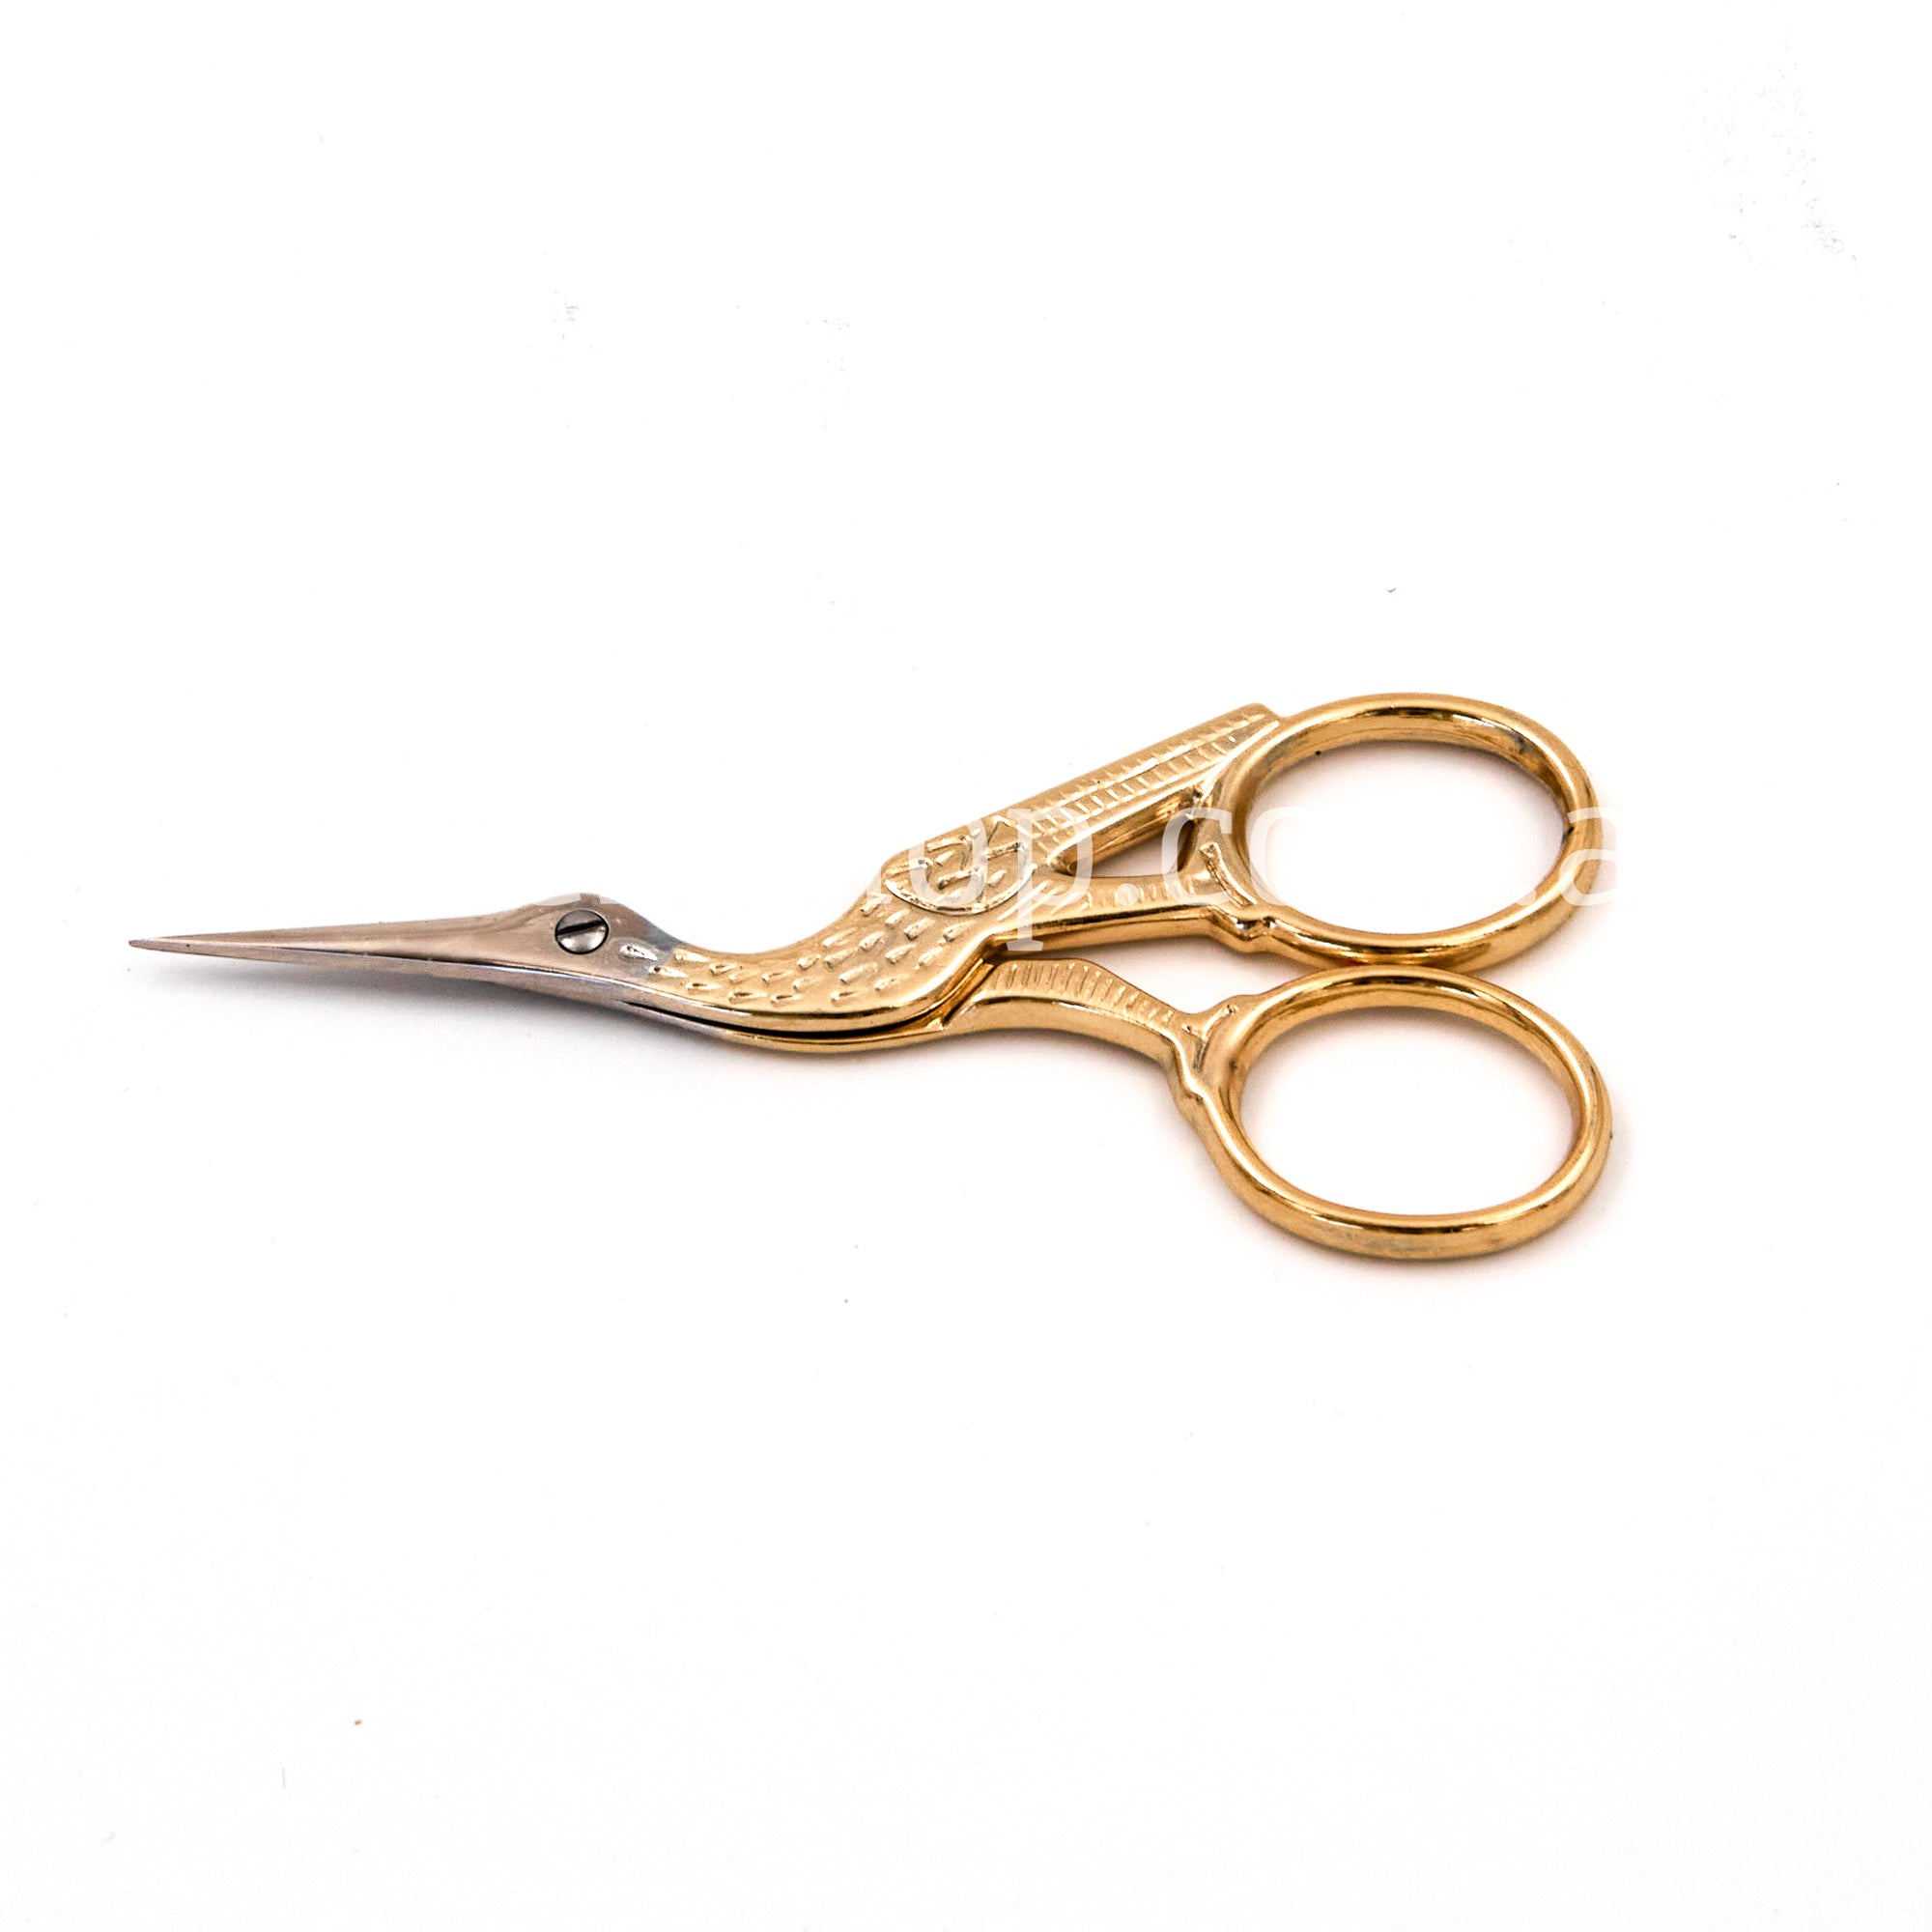 Gingher Stork Embroidery Scissors 3.5inch